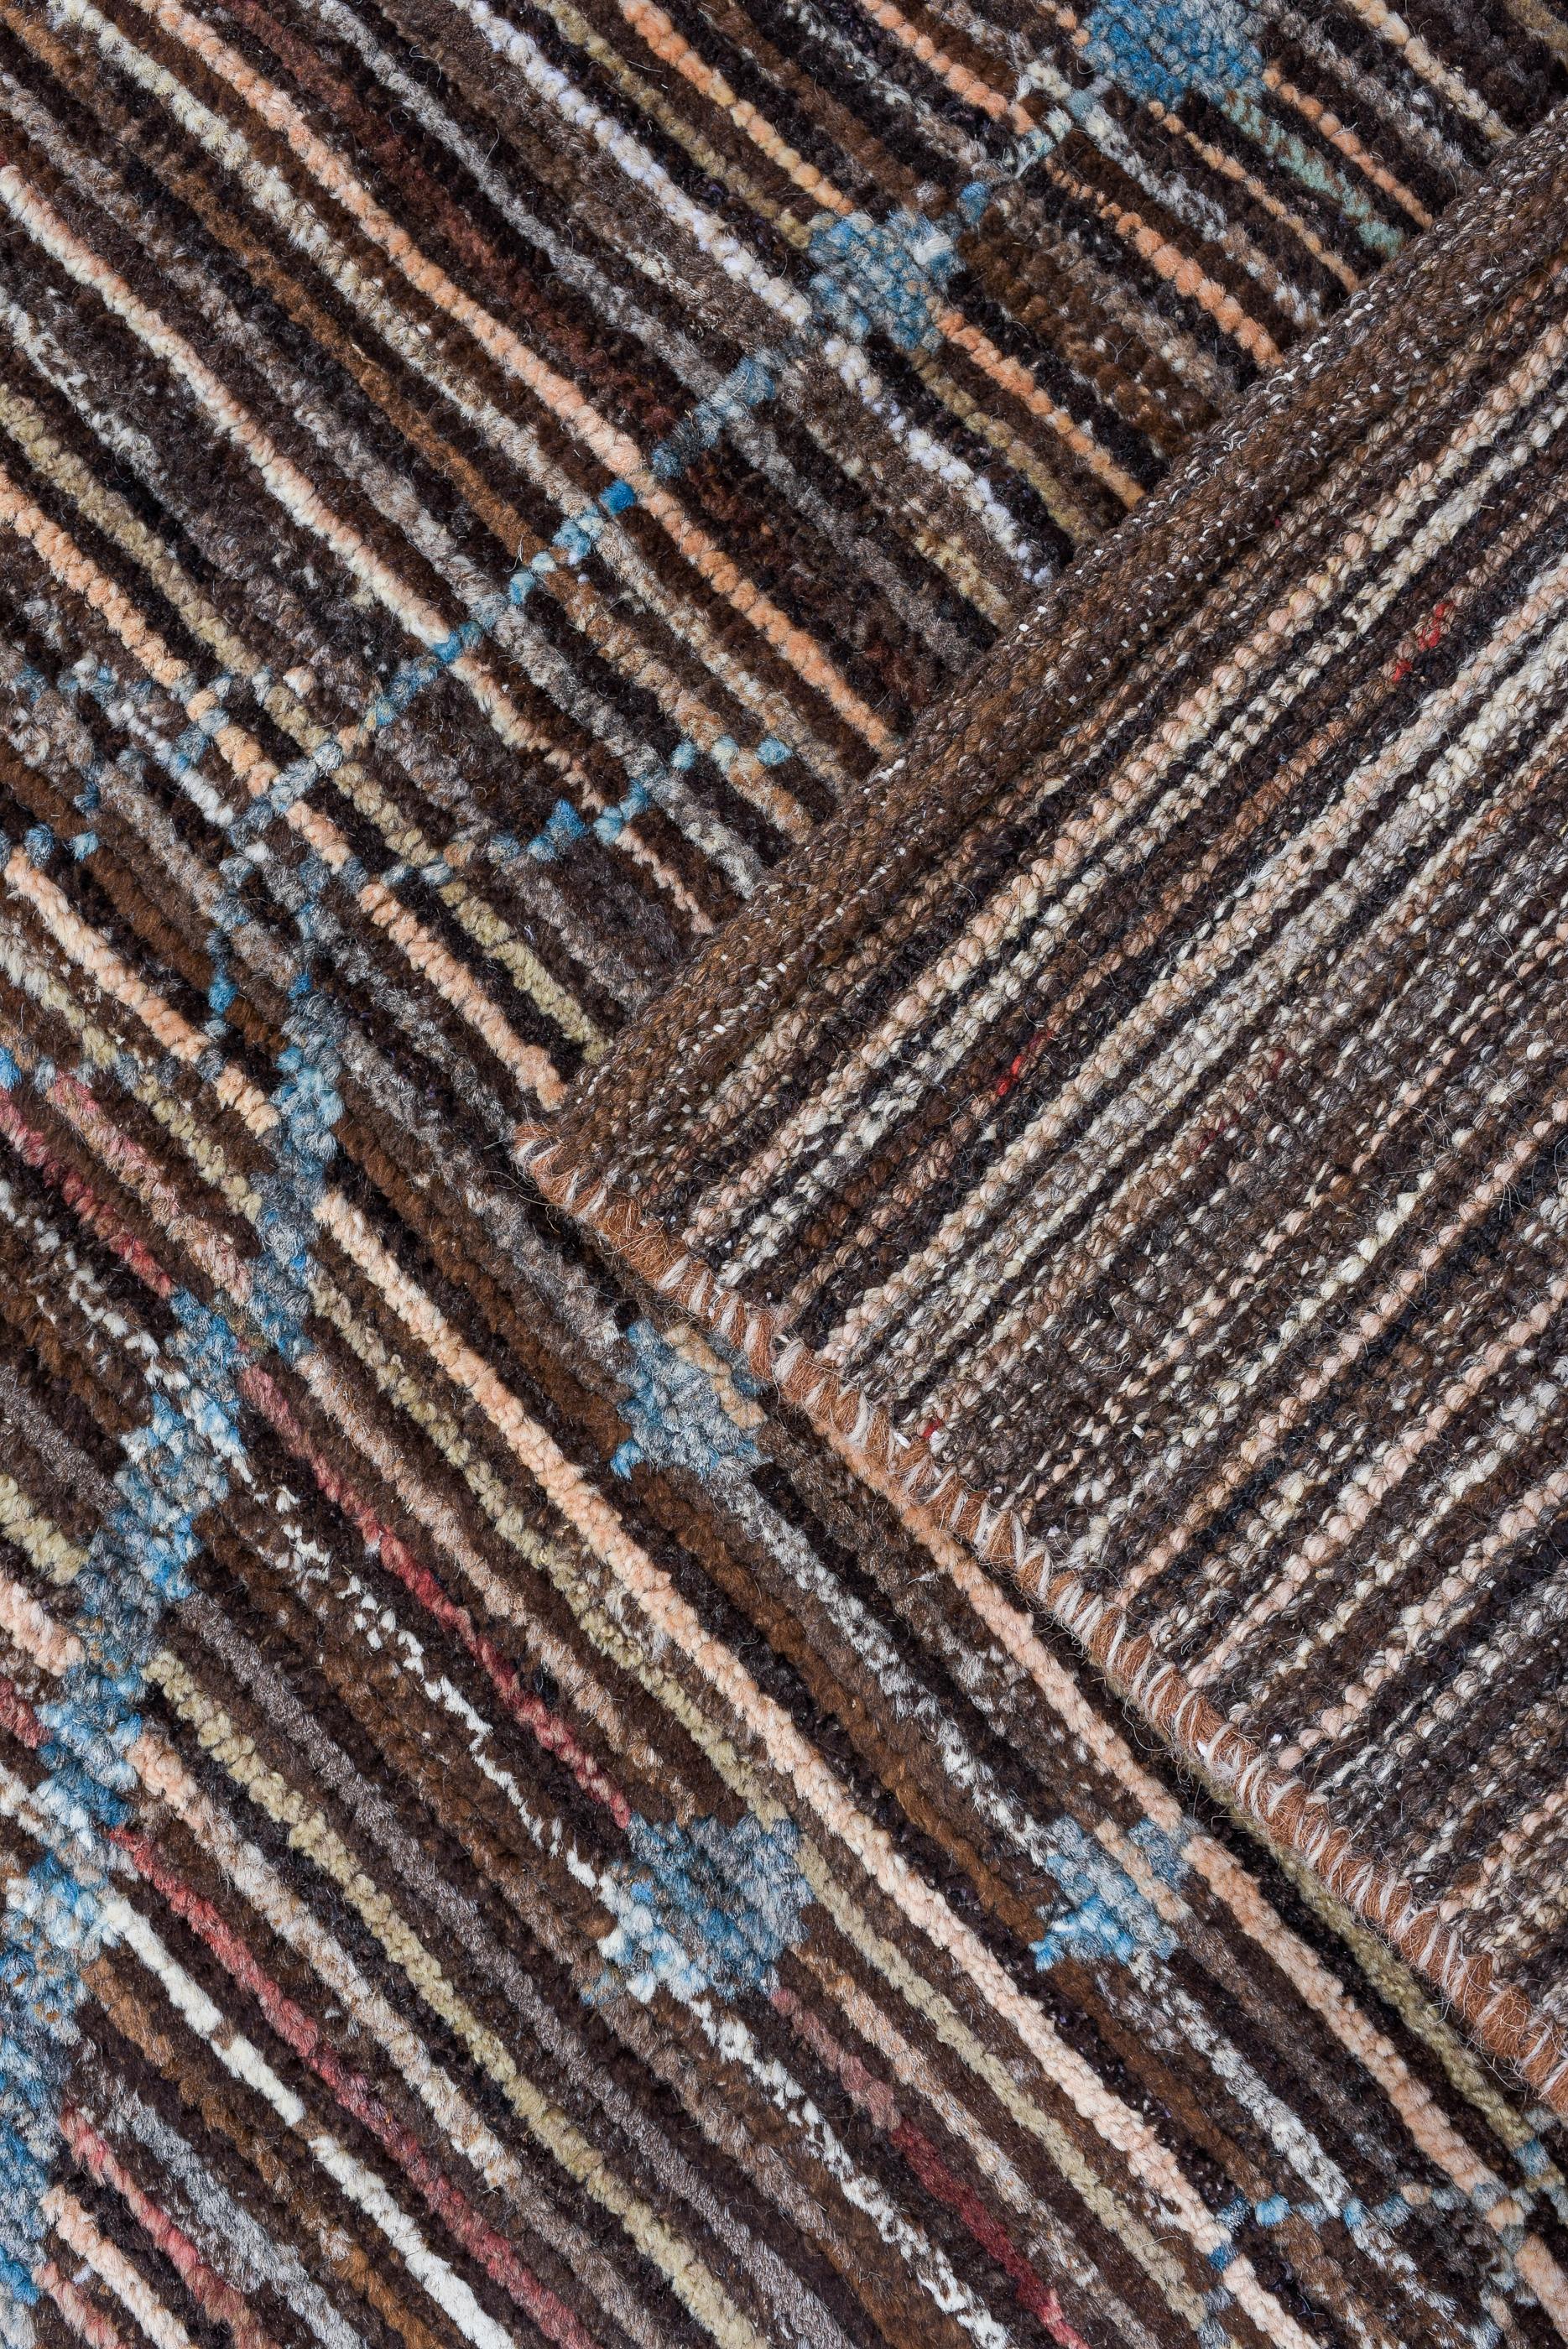 Azure Blue on Rocky Brown with Village Weavings In Excellent Condition For Sale In New York, NY